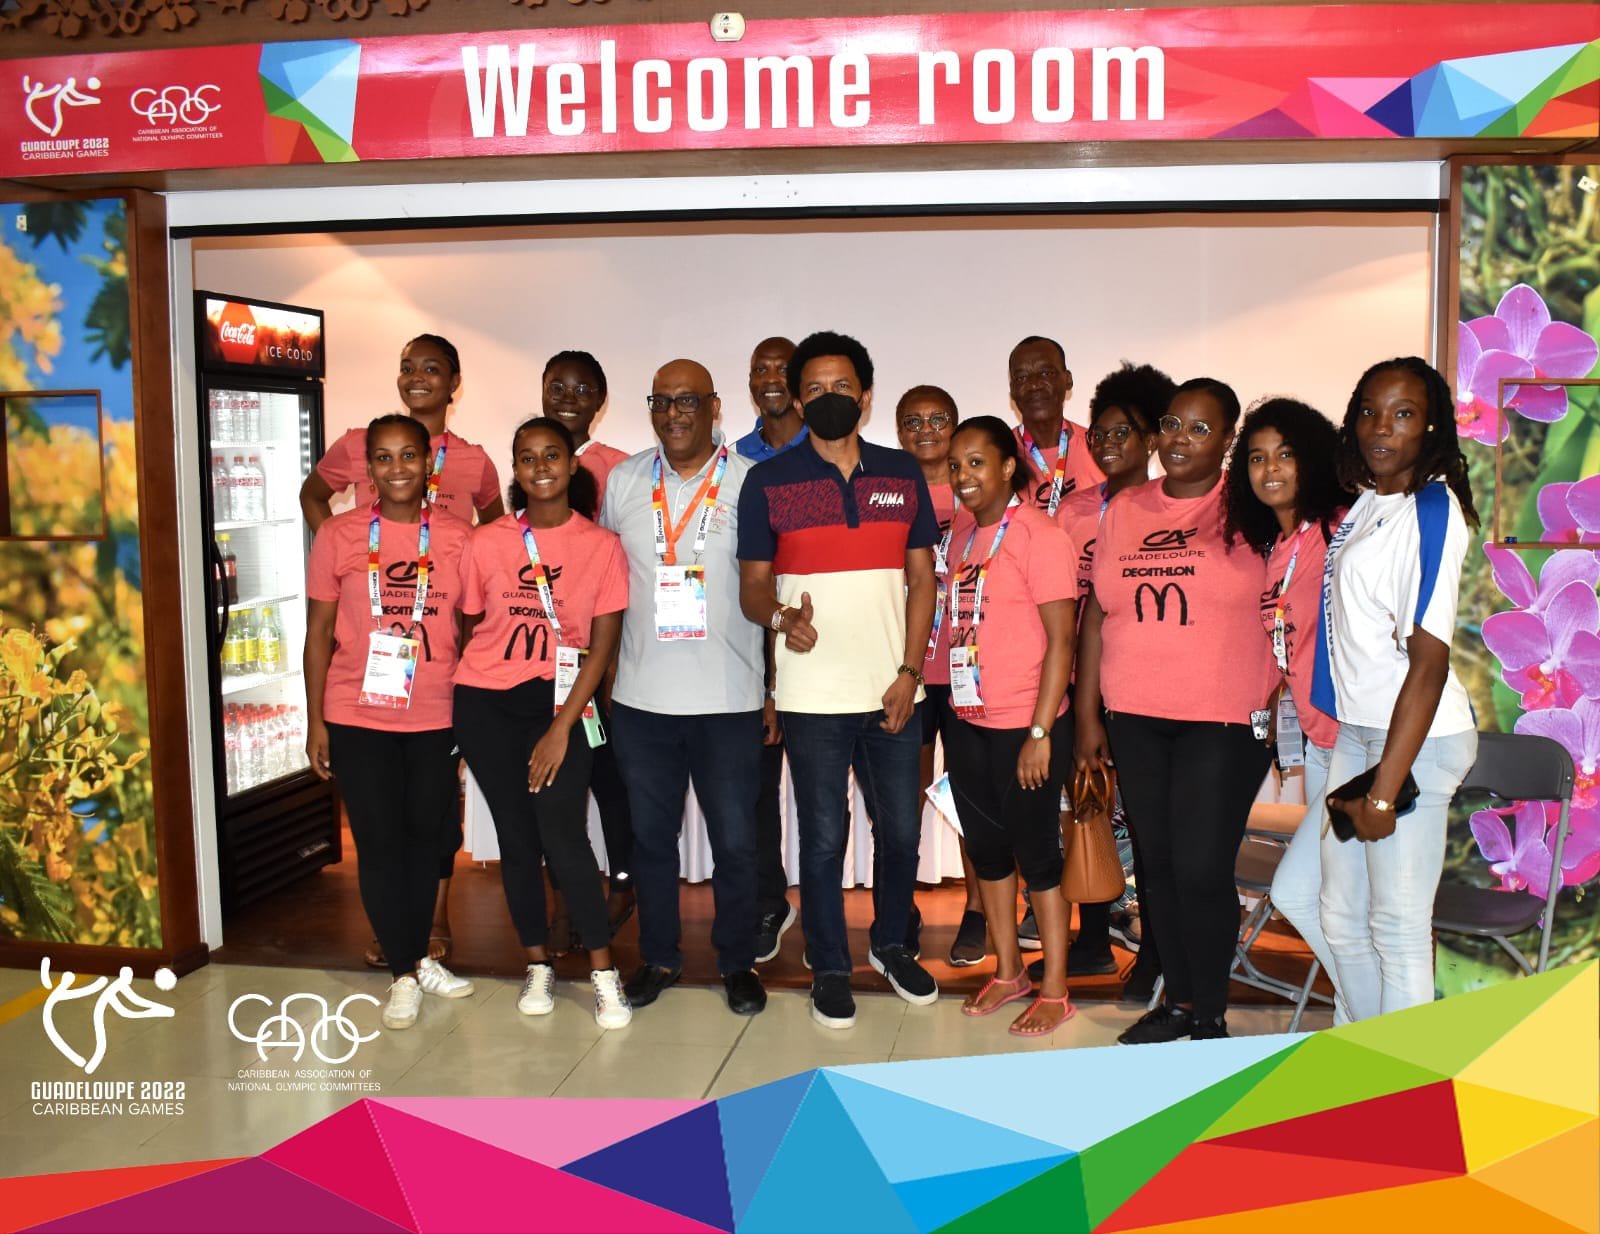 CANOC President Brian Lewis pictured with local organizers ahead of the 2022 Caribbean Games. Photo Credit: CANOC